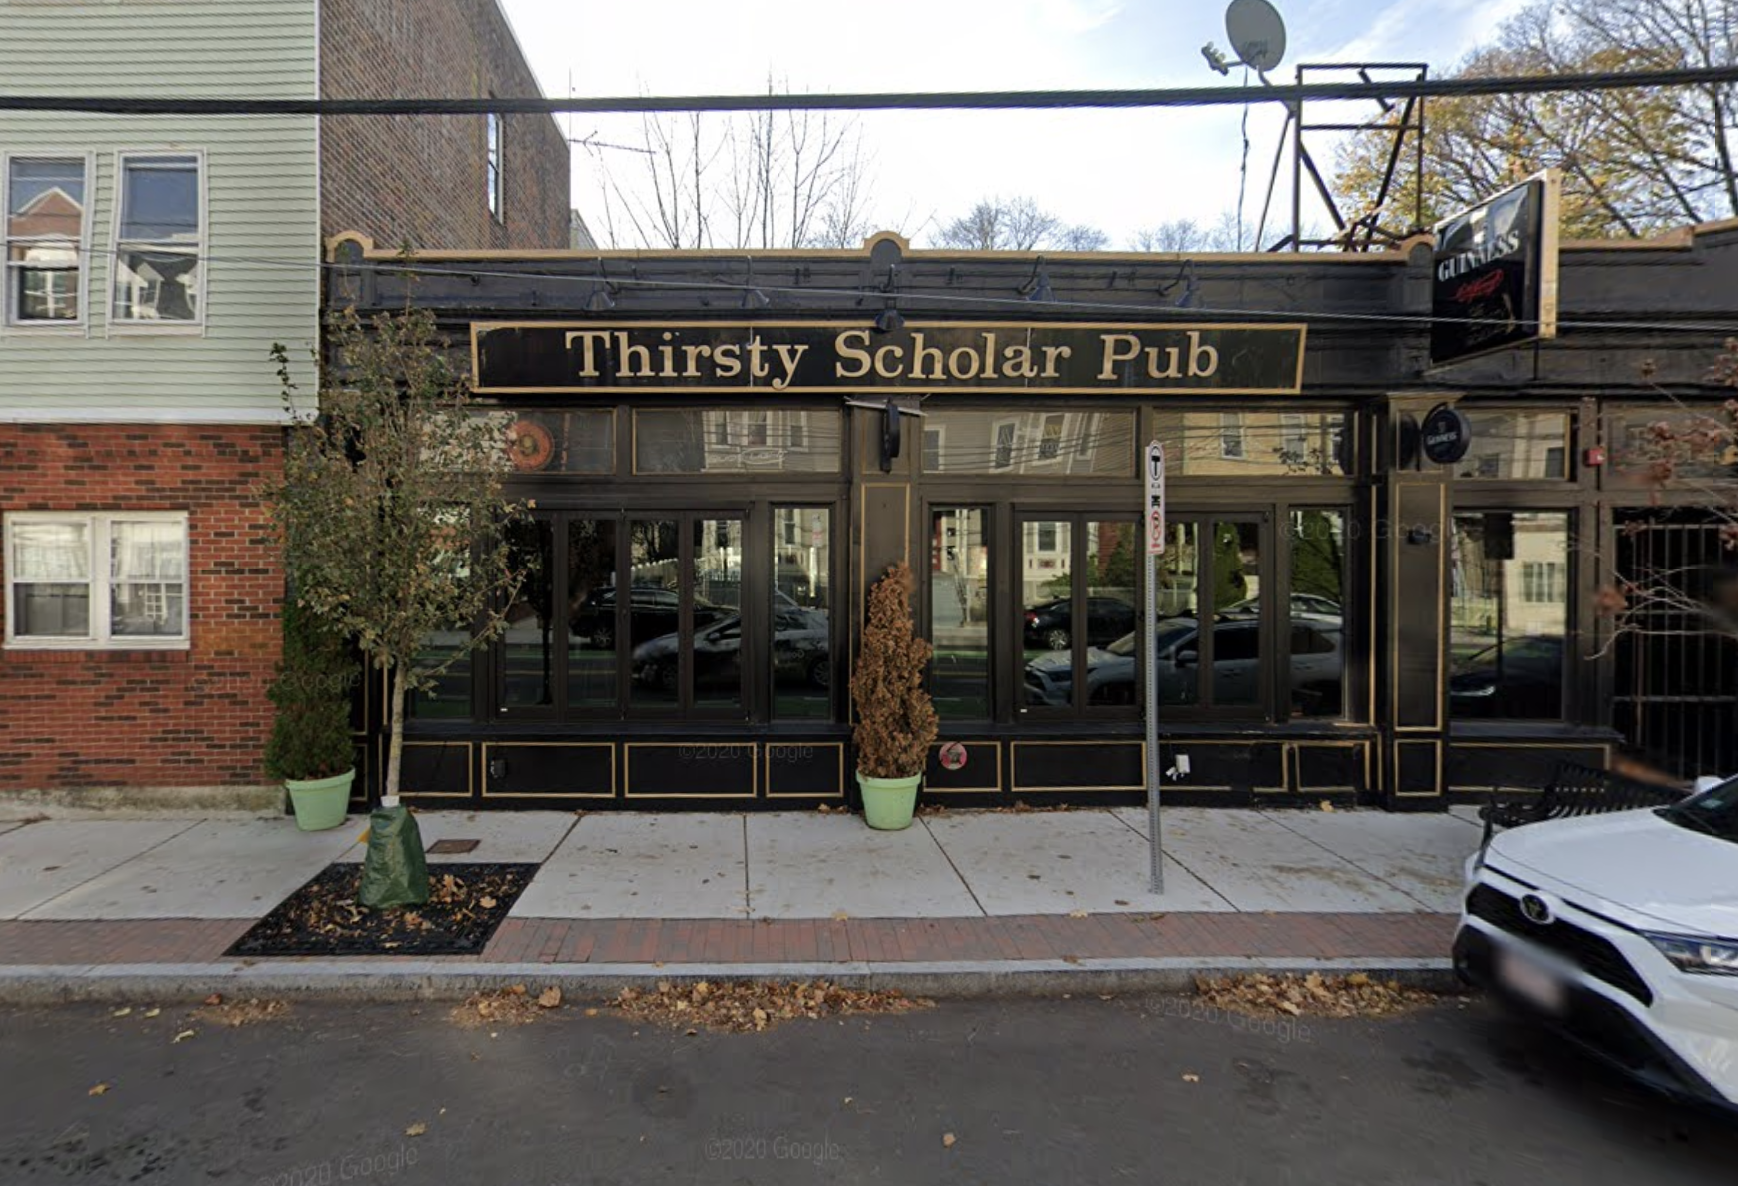 A bar exterior with a black and gold sign that reads “Thirsty Scholar Pub.”